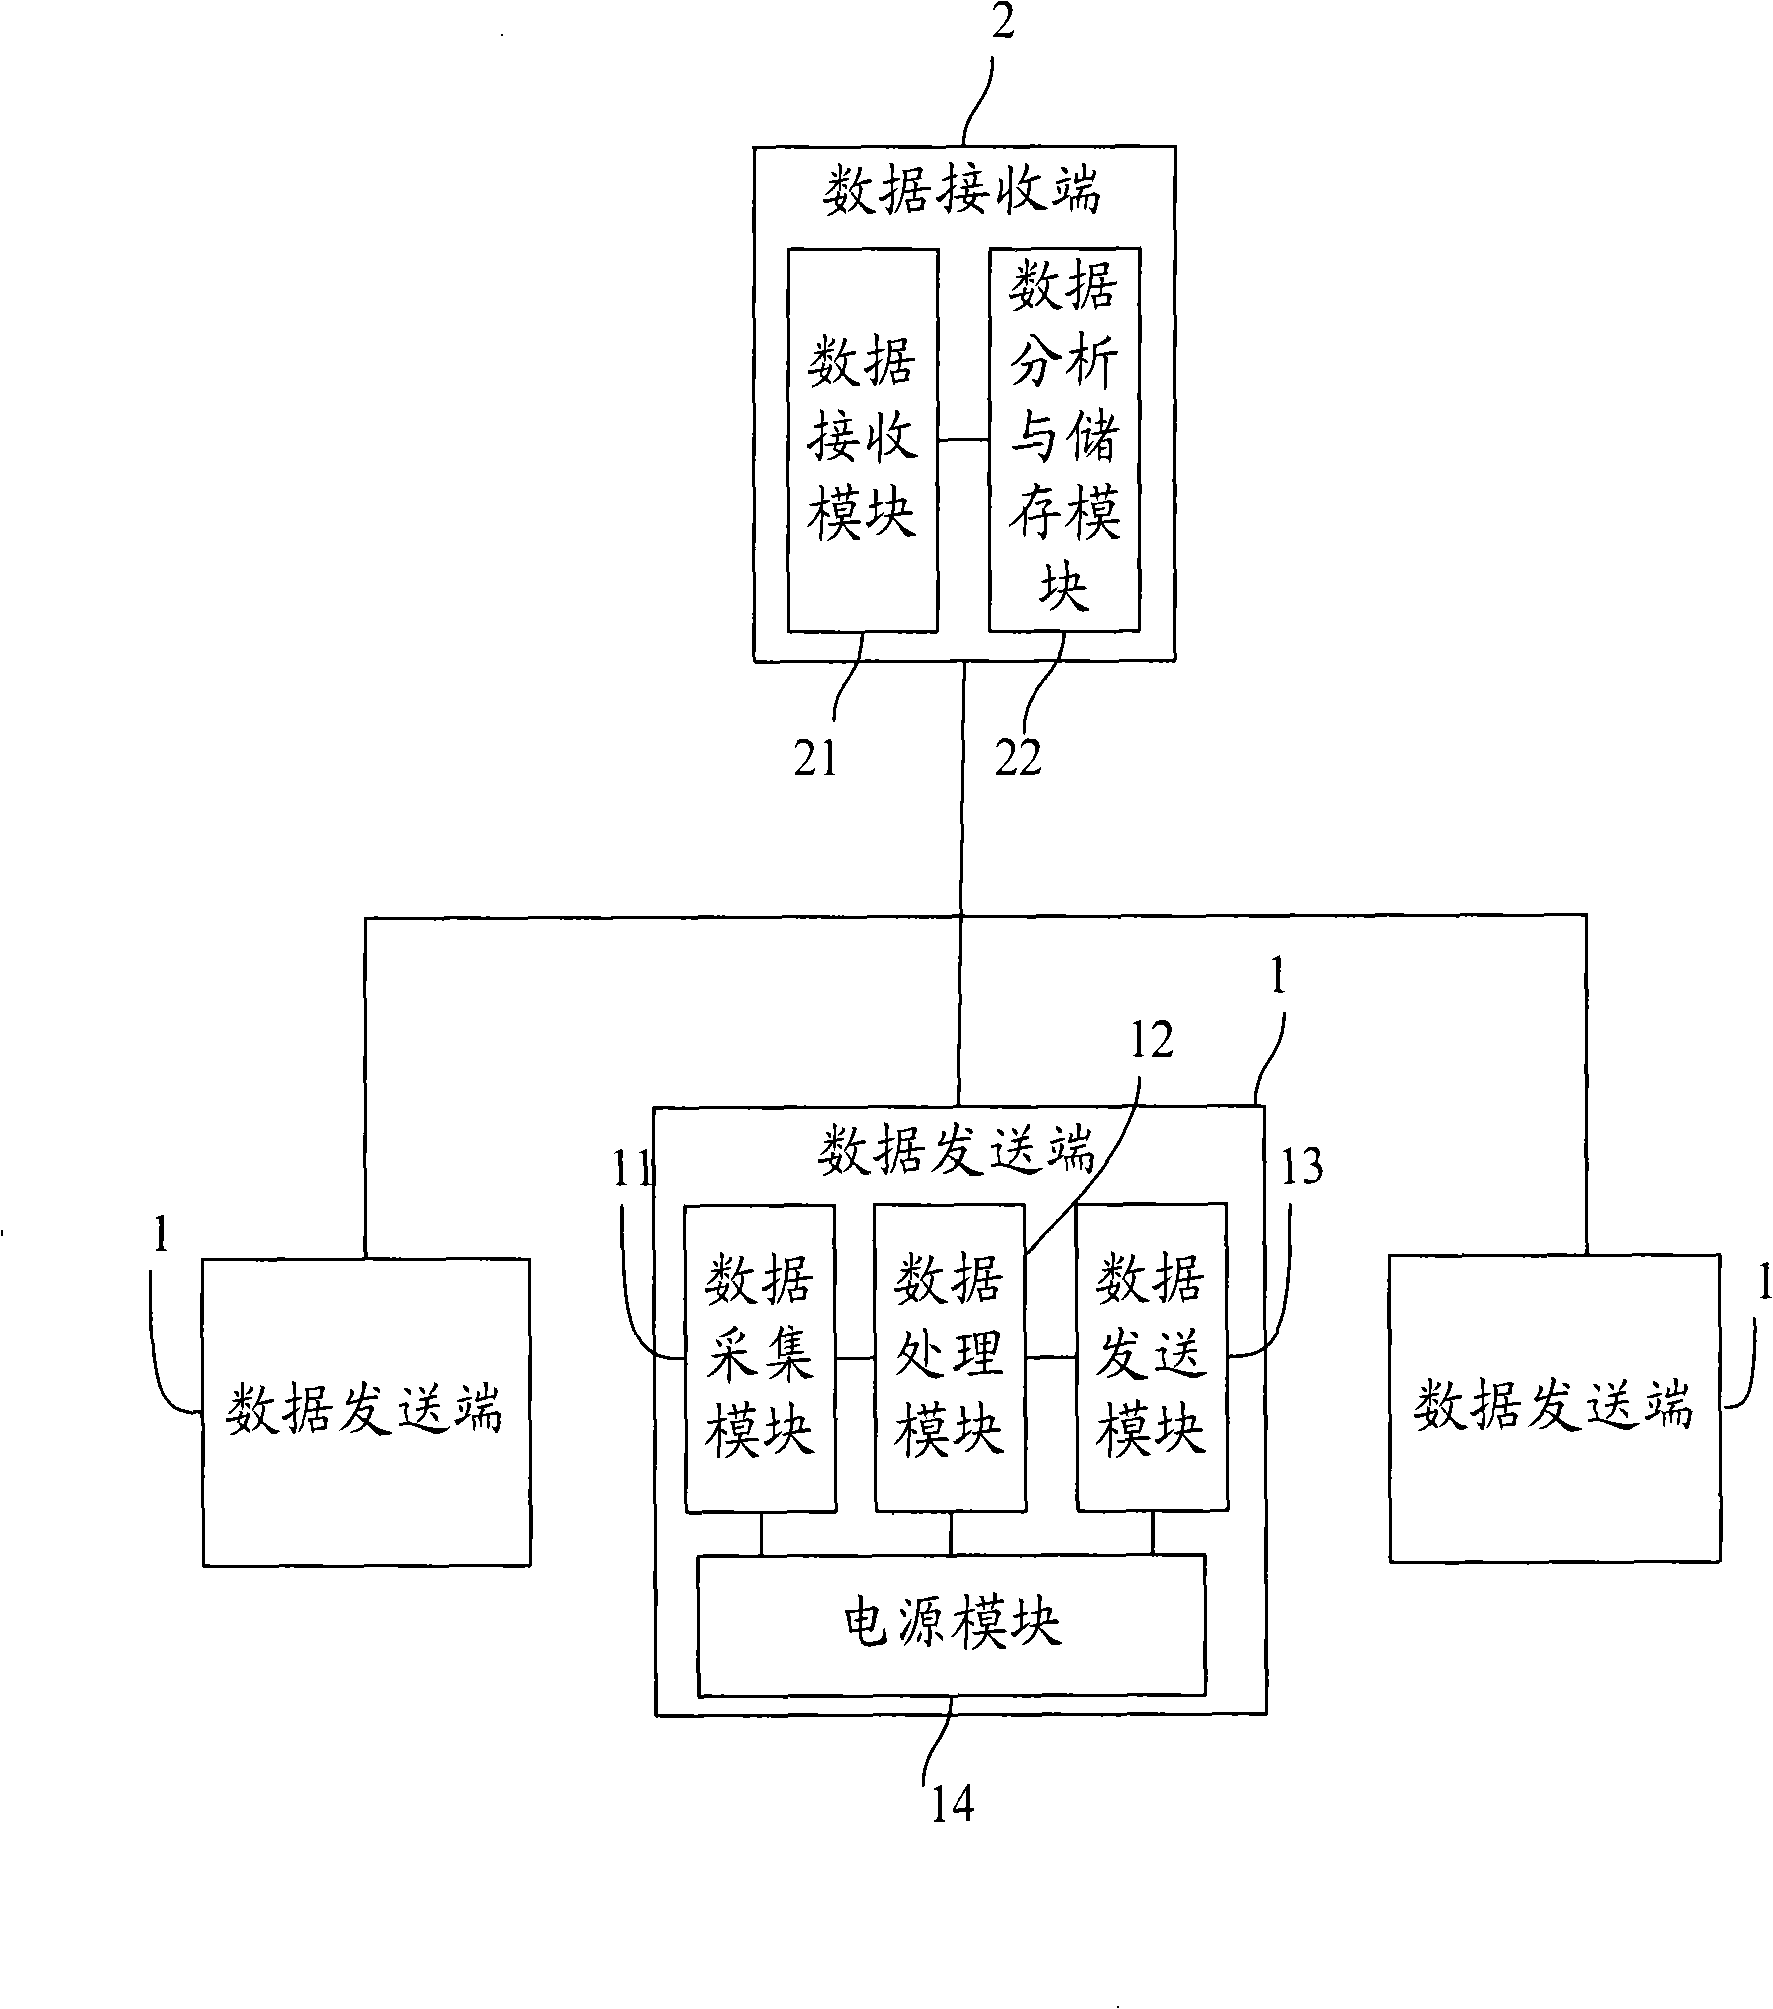 Method, system and apparatus for remotely monitoring product use condition